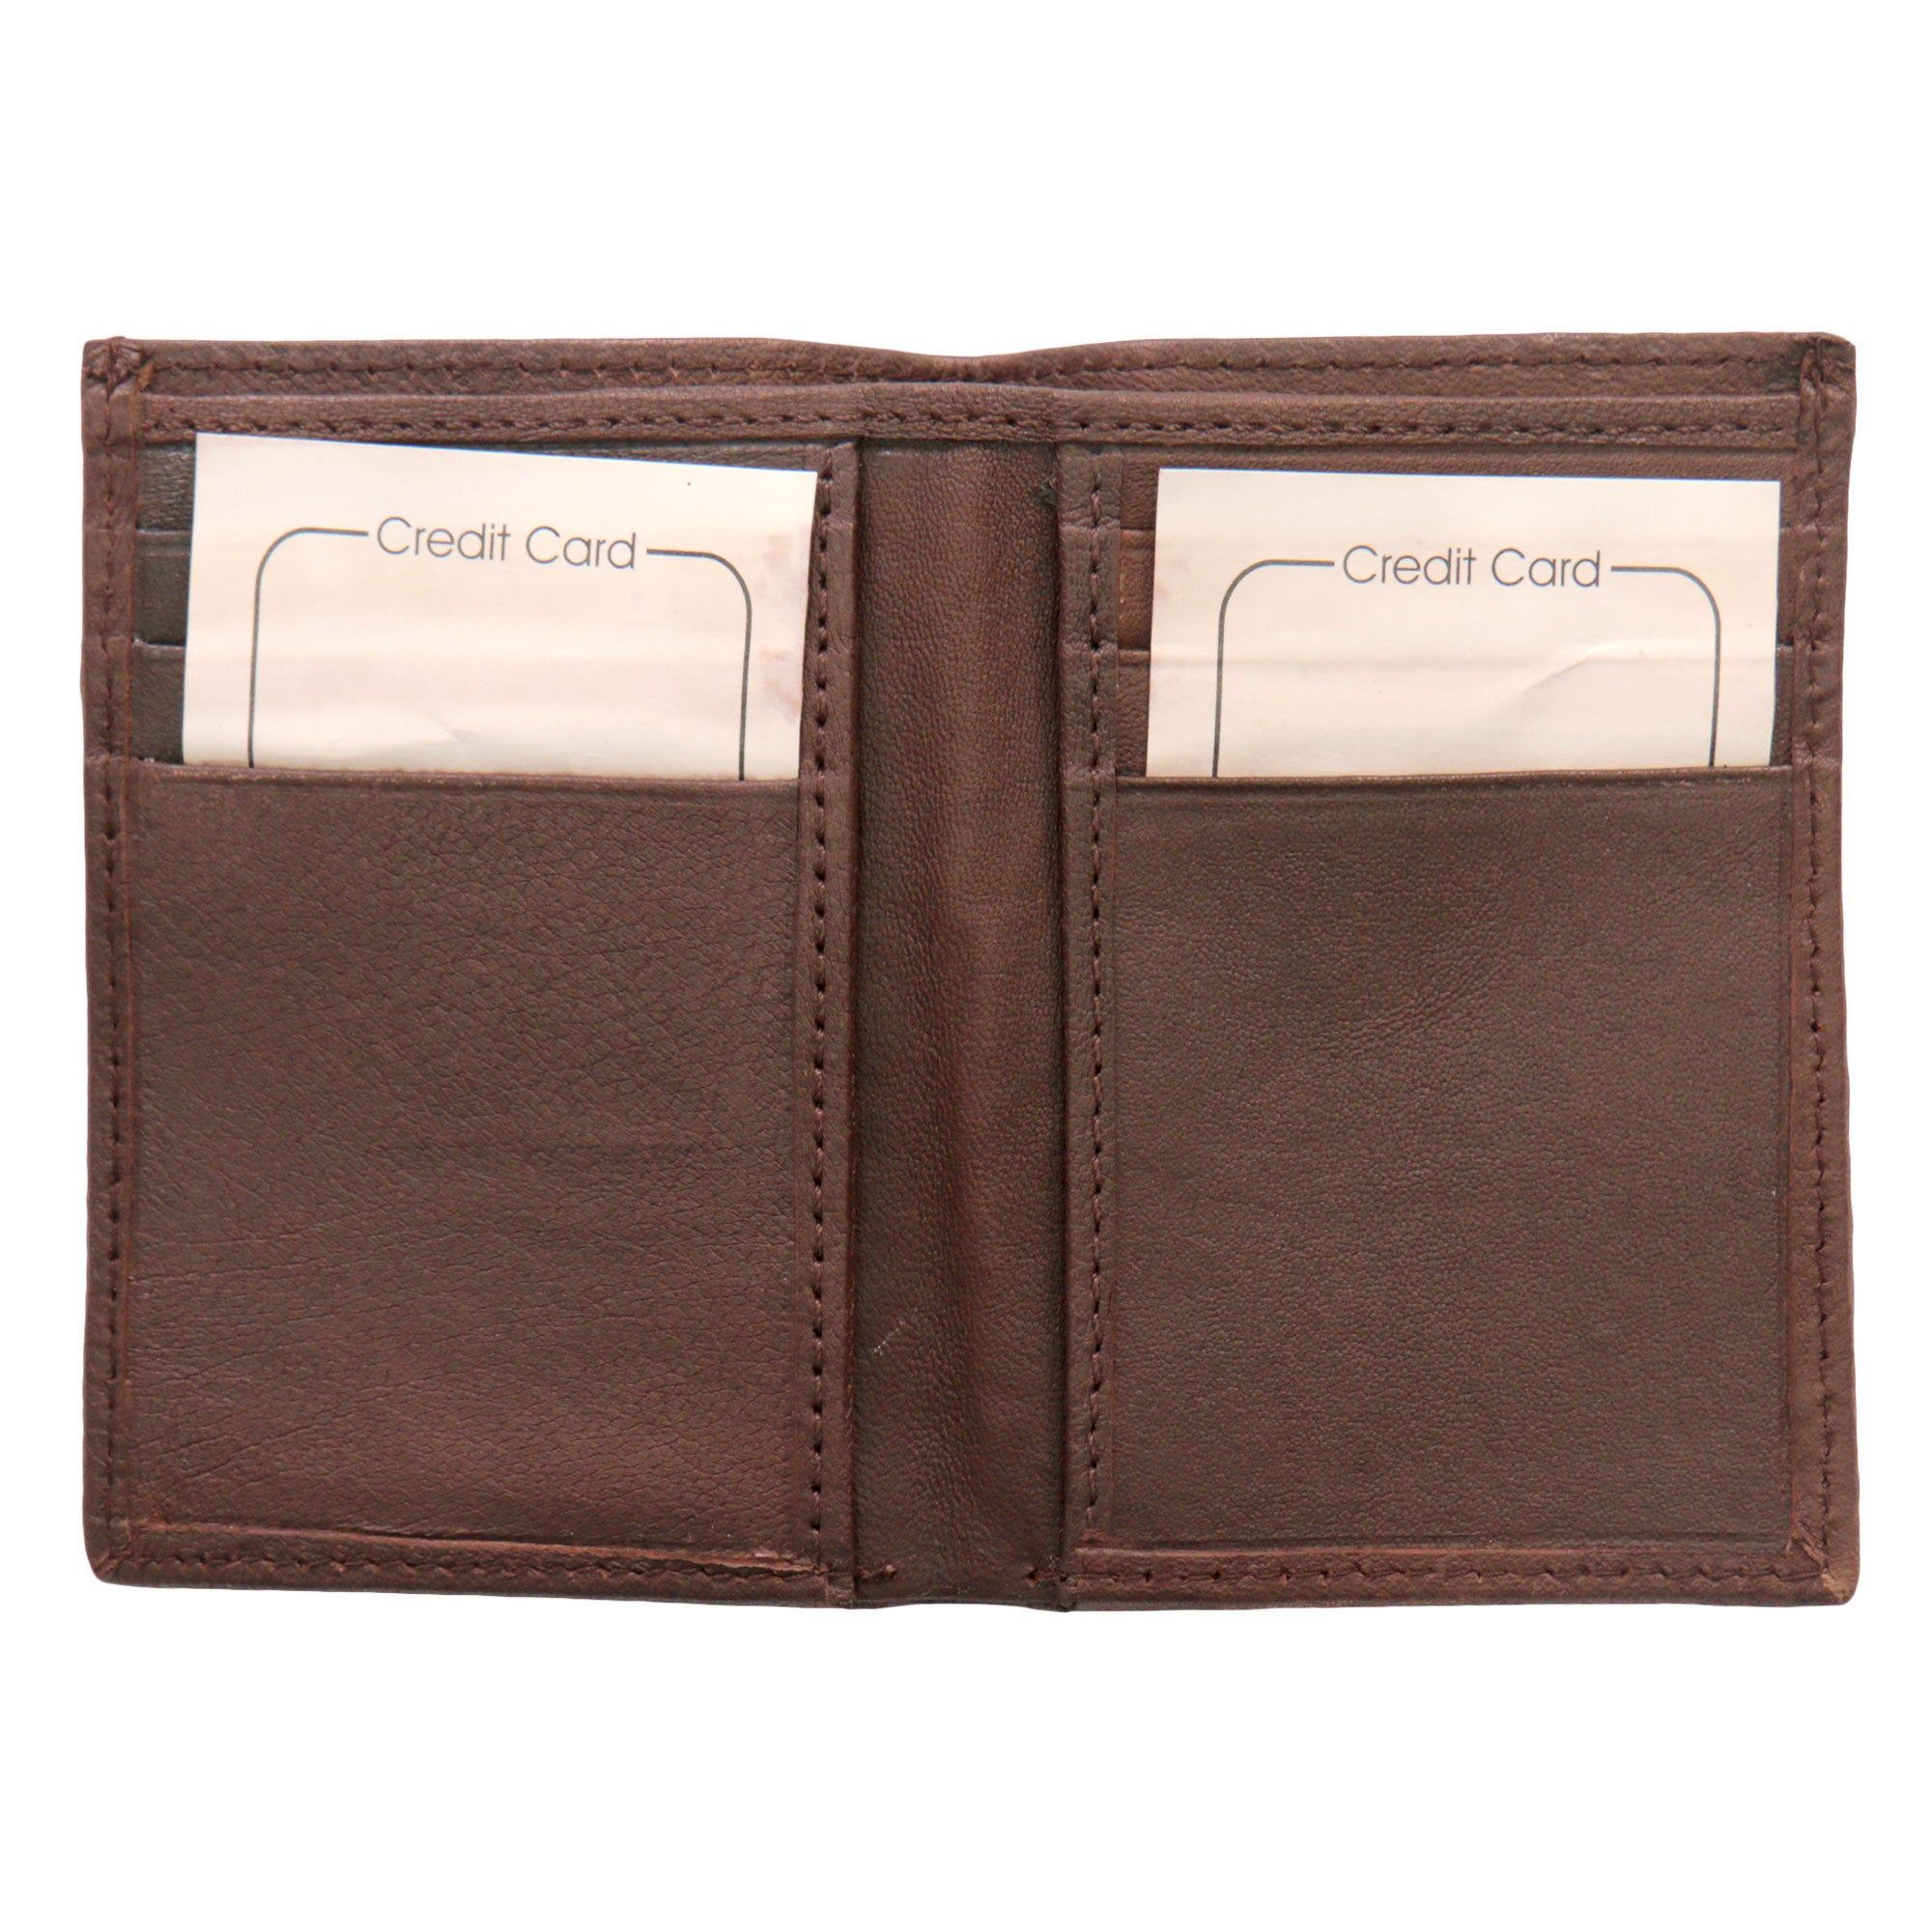 Hot Leathers Brown Credit Card Holding Wallet